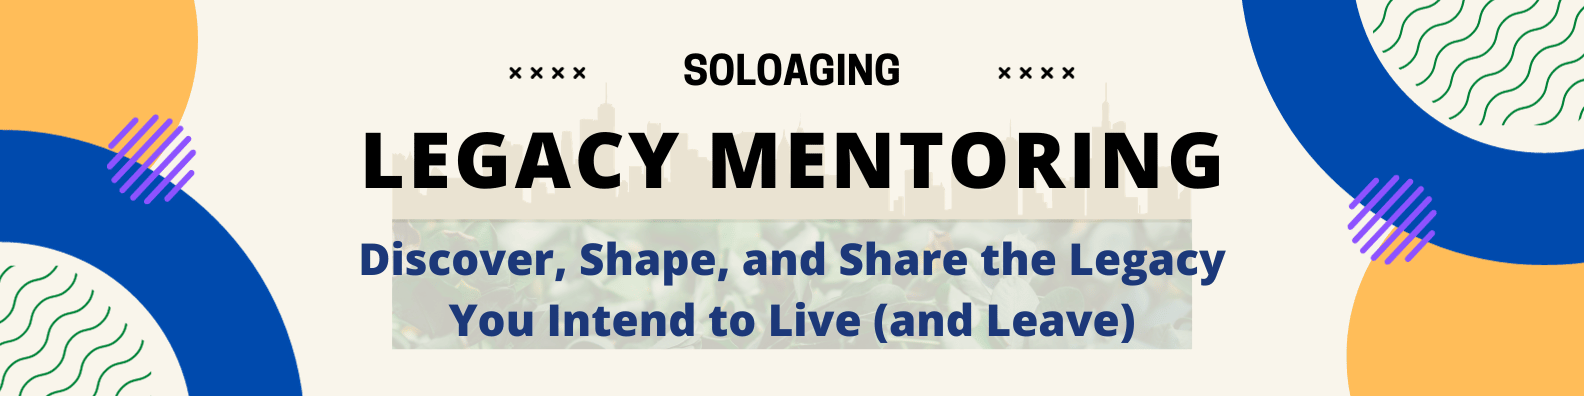 Legacy Mentoring Packages